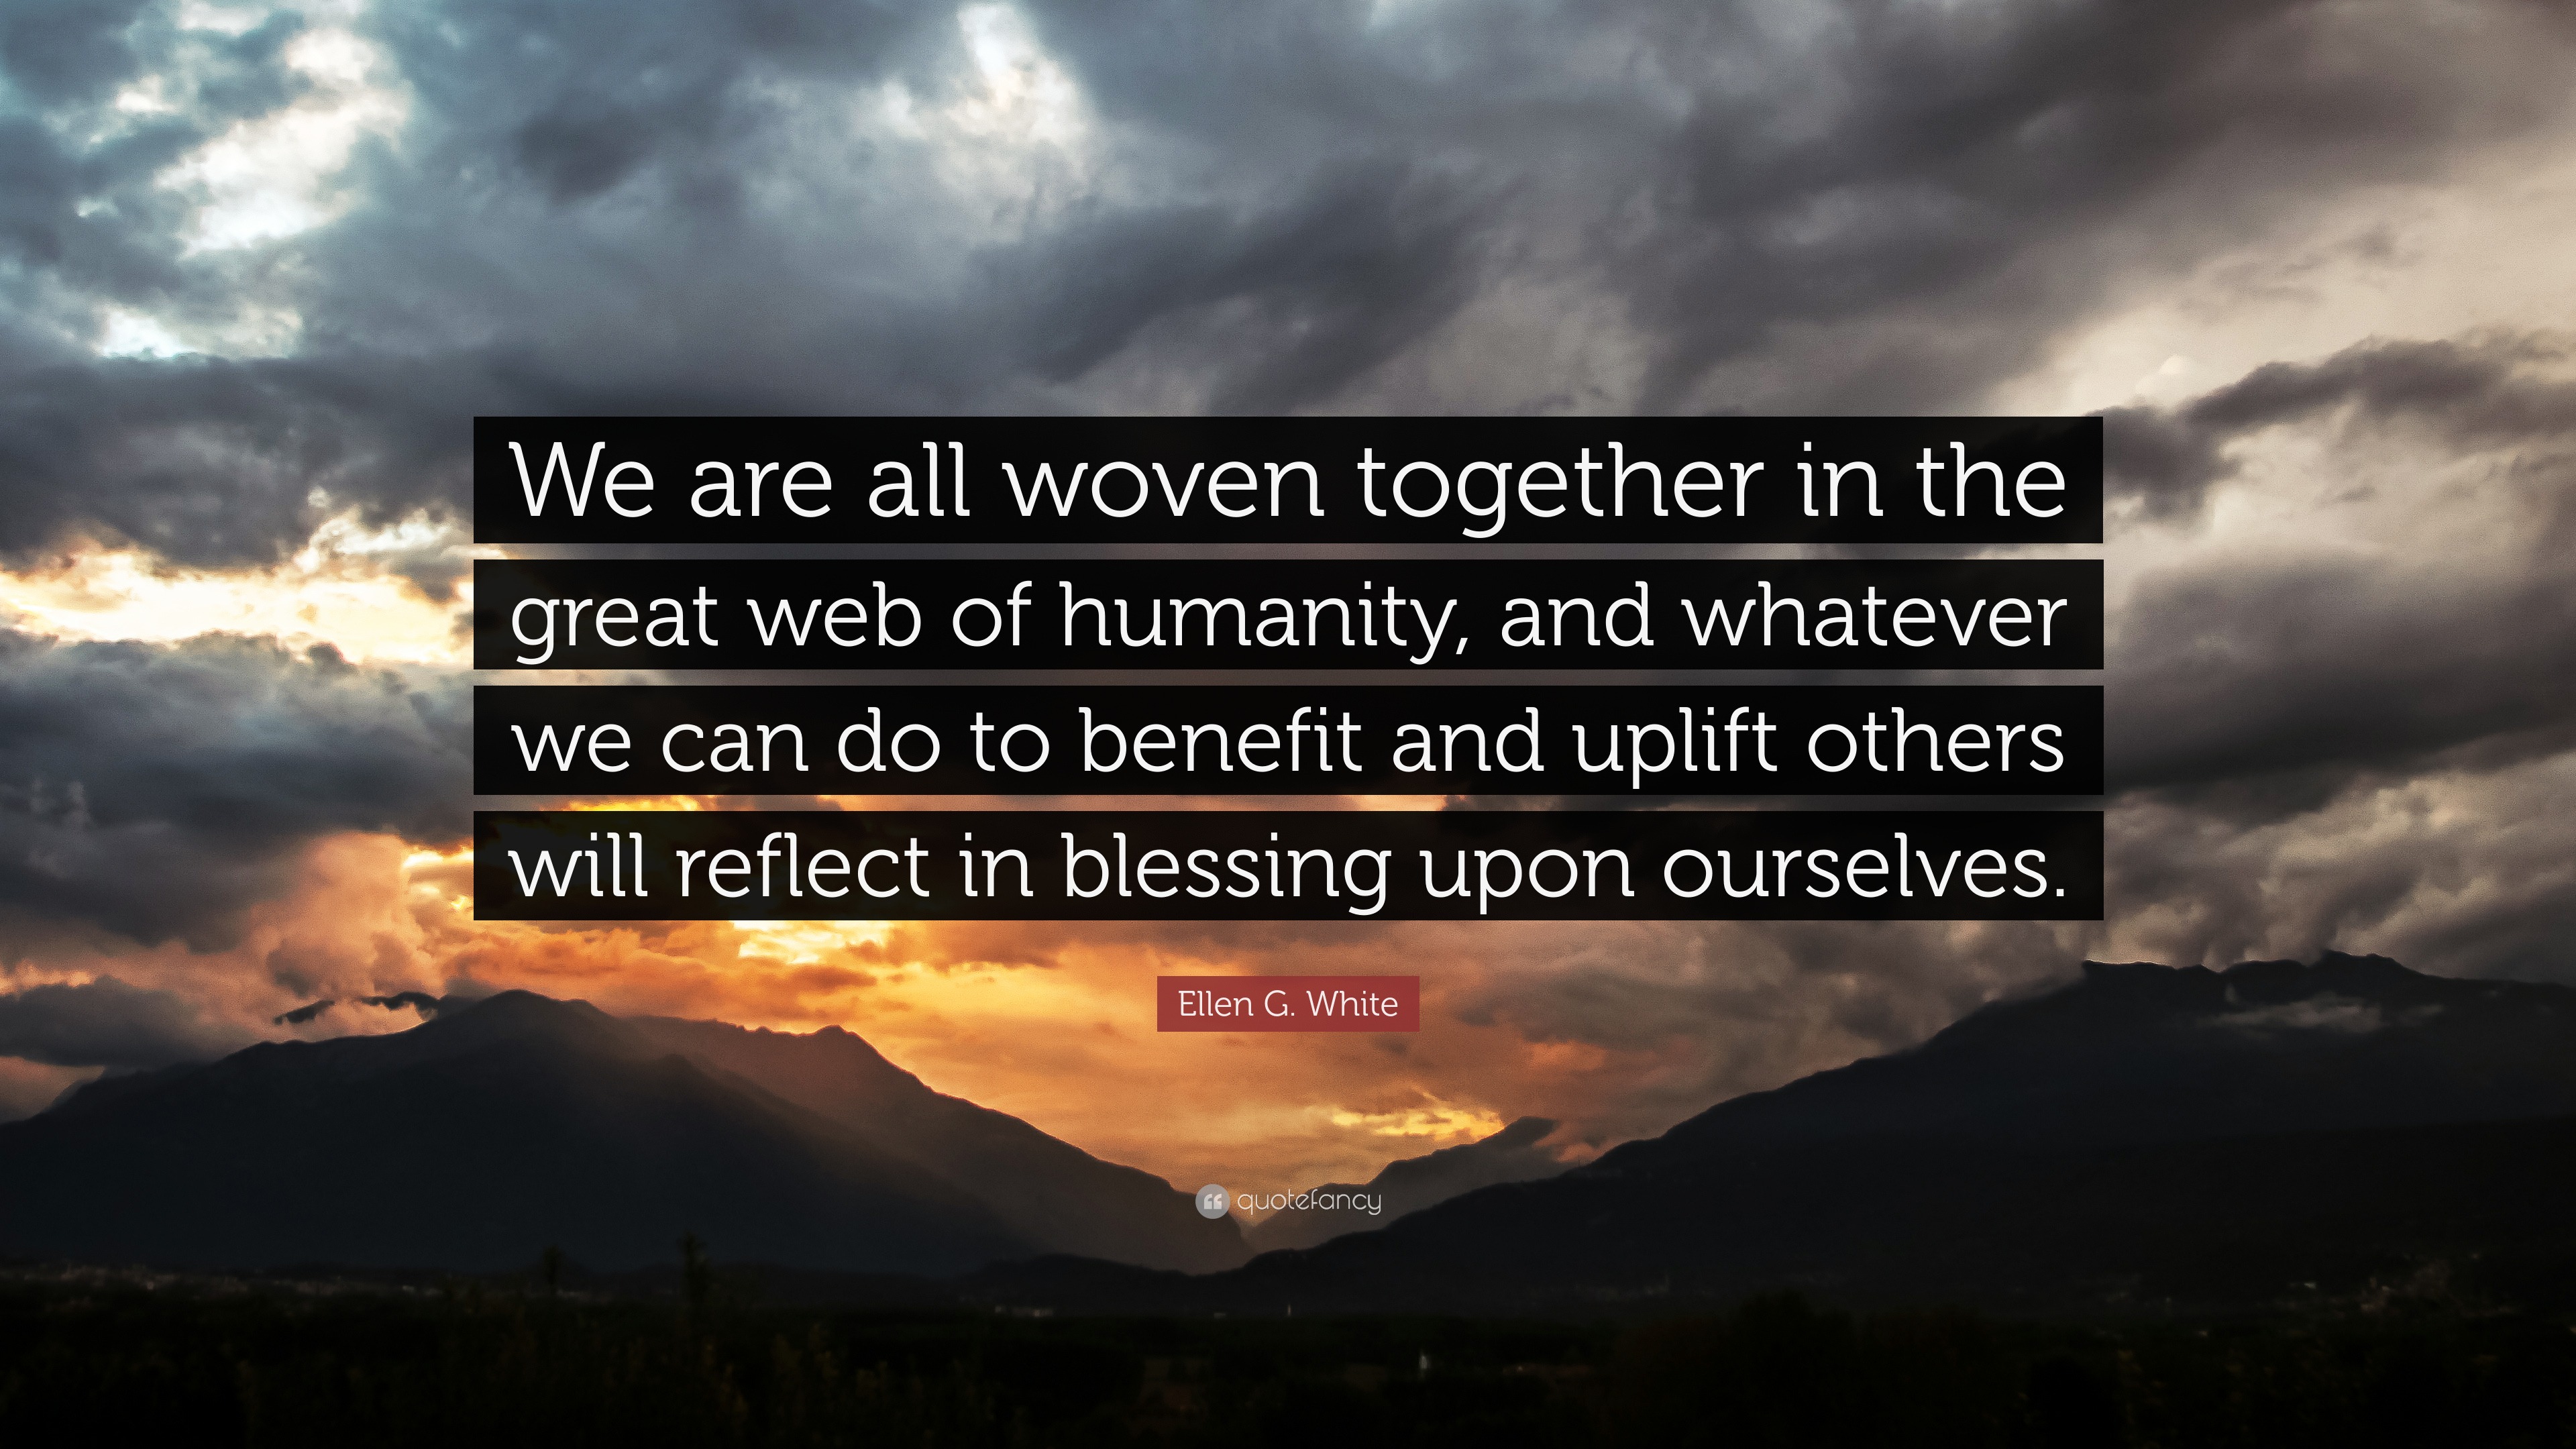 Ellen G. White Quote: “We are all woven together in the great web of ...